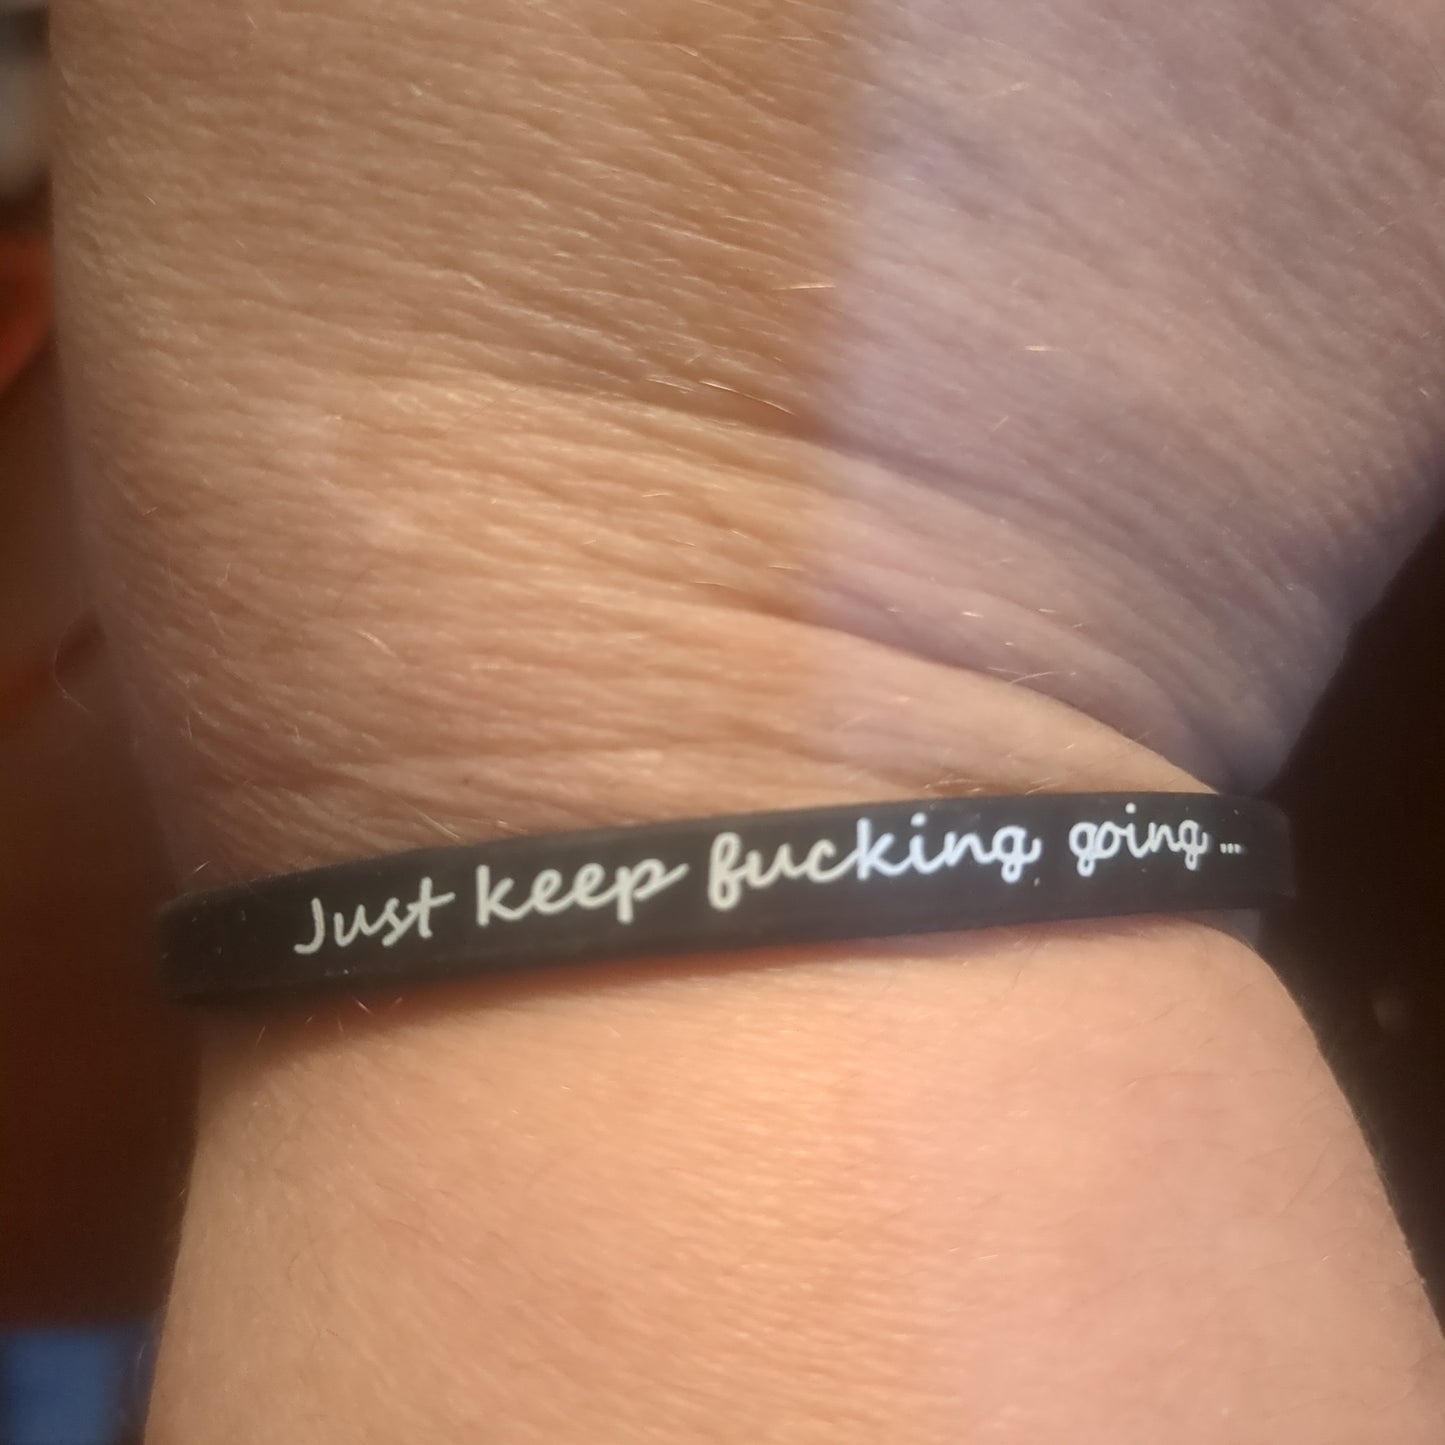 Caution x-rated black silicone bracelet for encouragement says just keep going